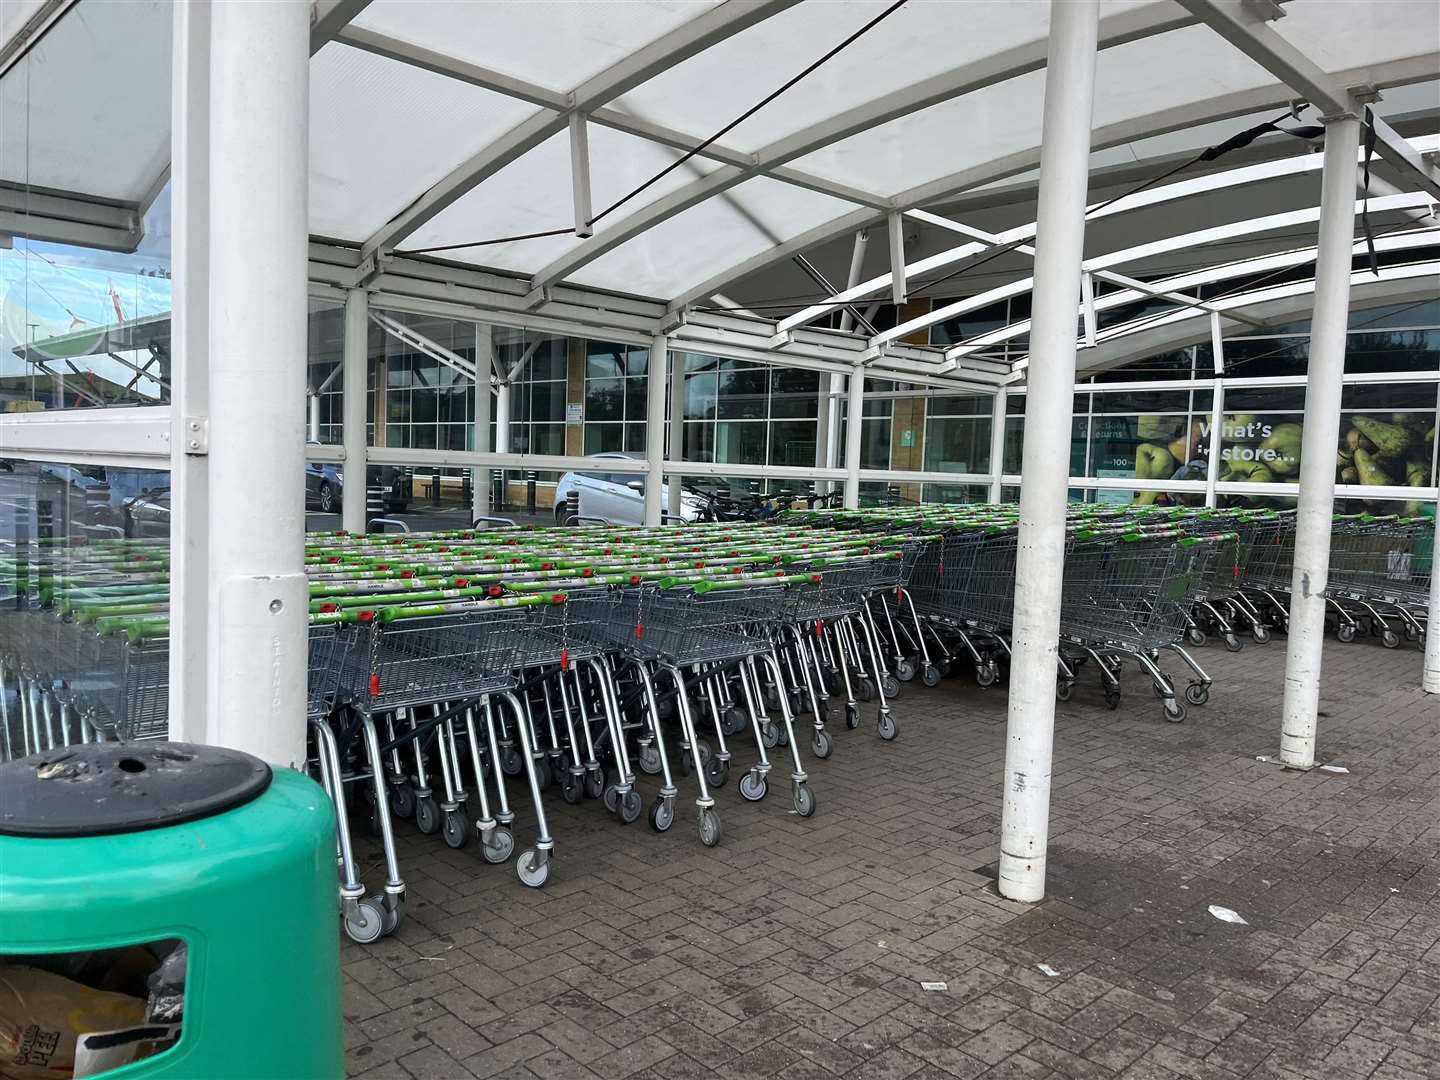 New trolleys have been delivered to Asda in Ashford after there was a scarce amount earlier this month